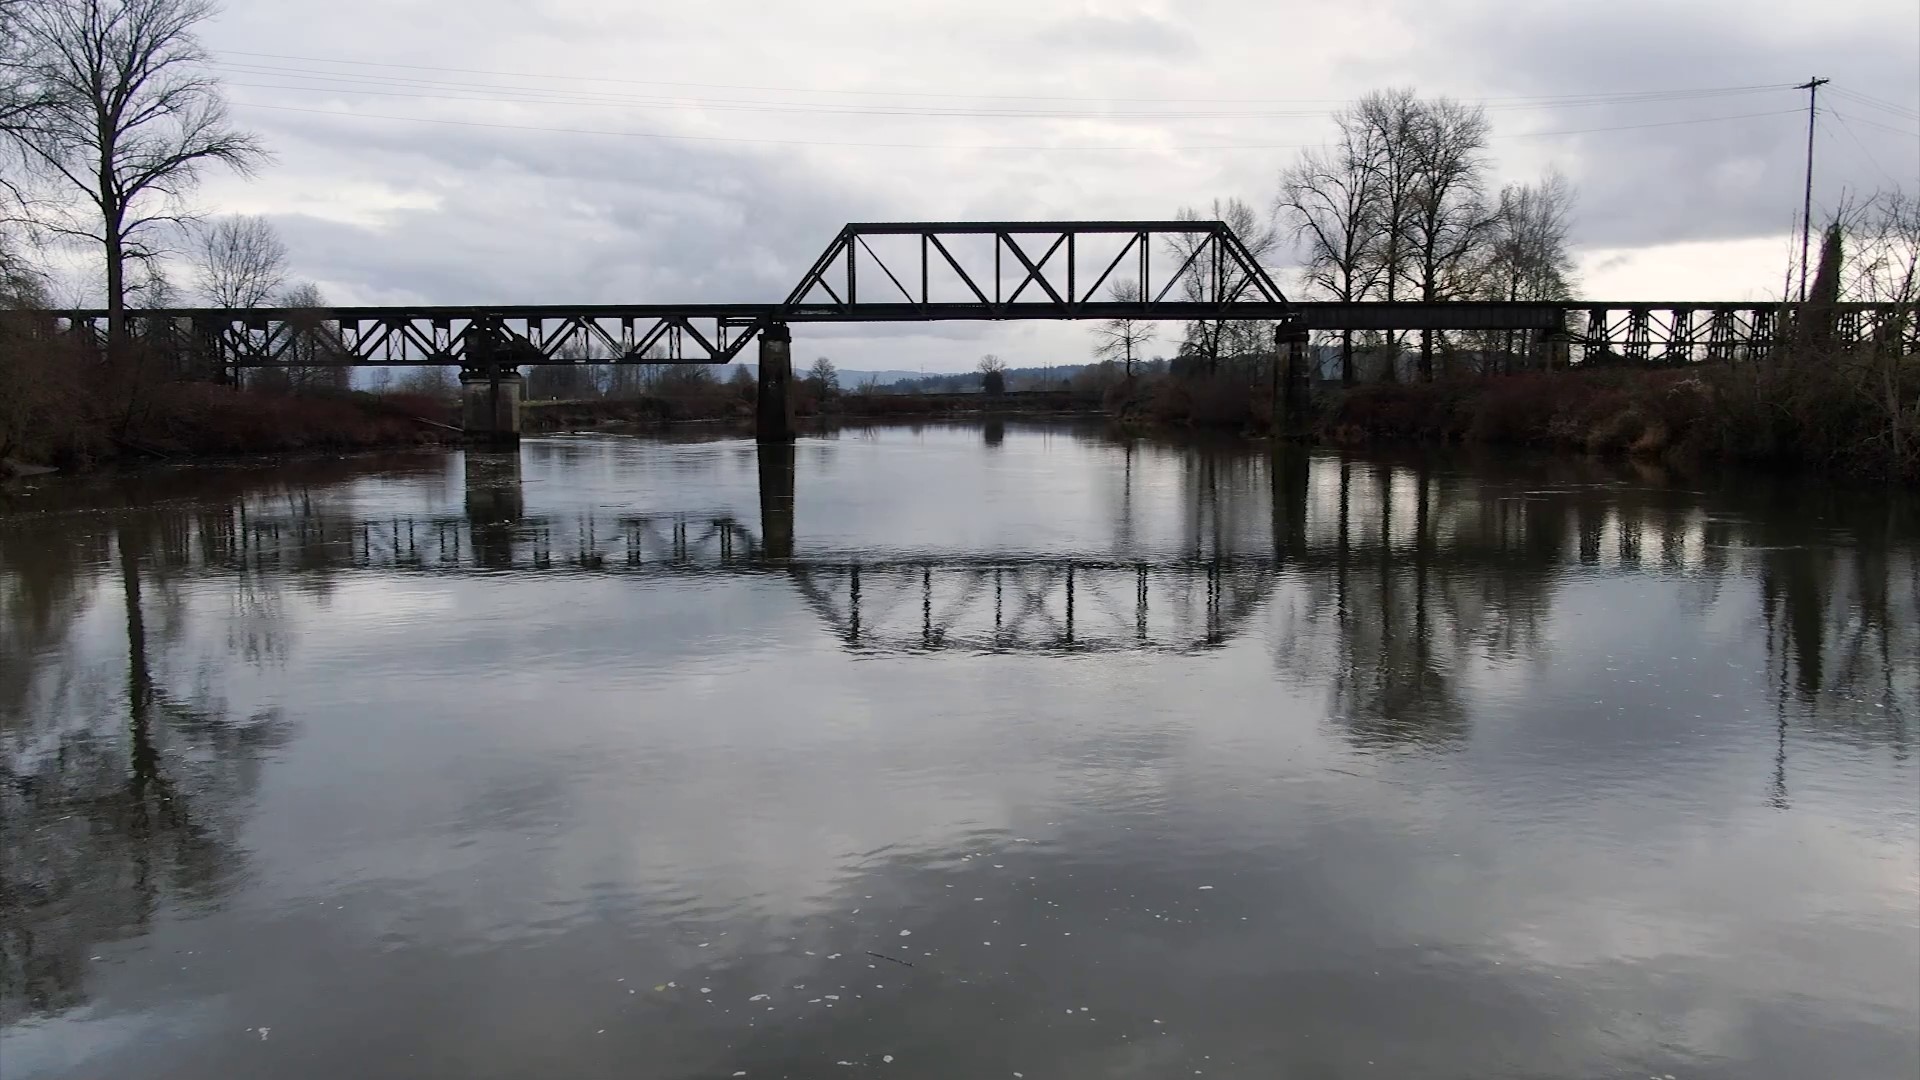 The National Weather Service predicts the Snohomish River will start rising on Sunday and will peak just below 'major' flood stage on Tuesday or Wednesday.